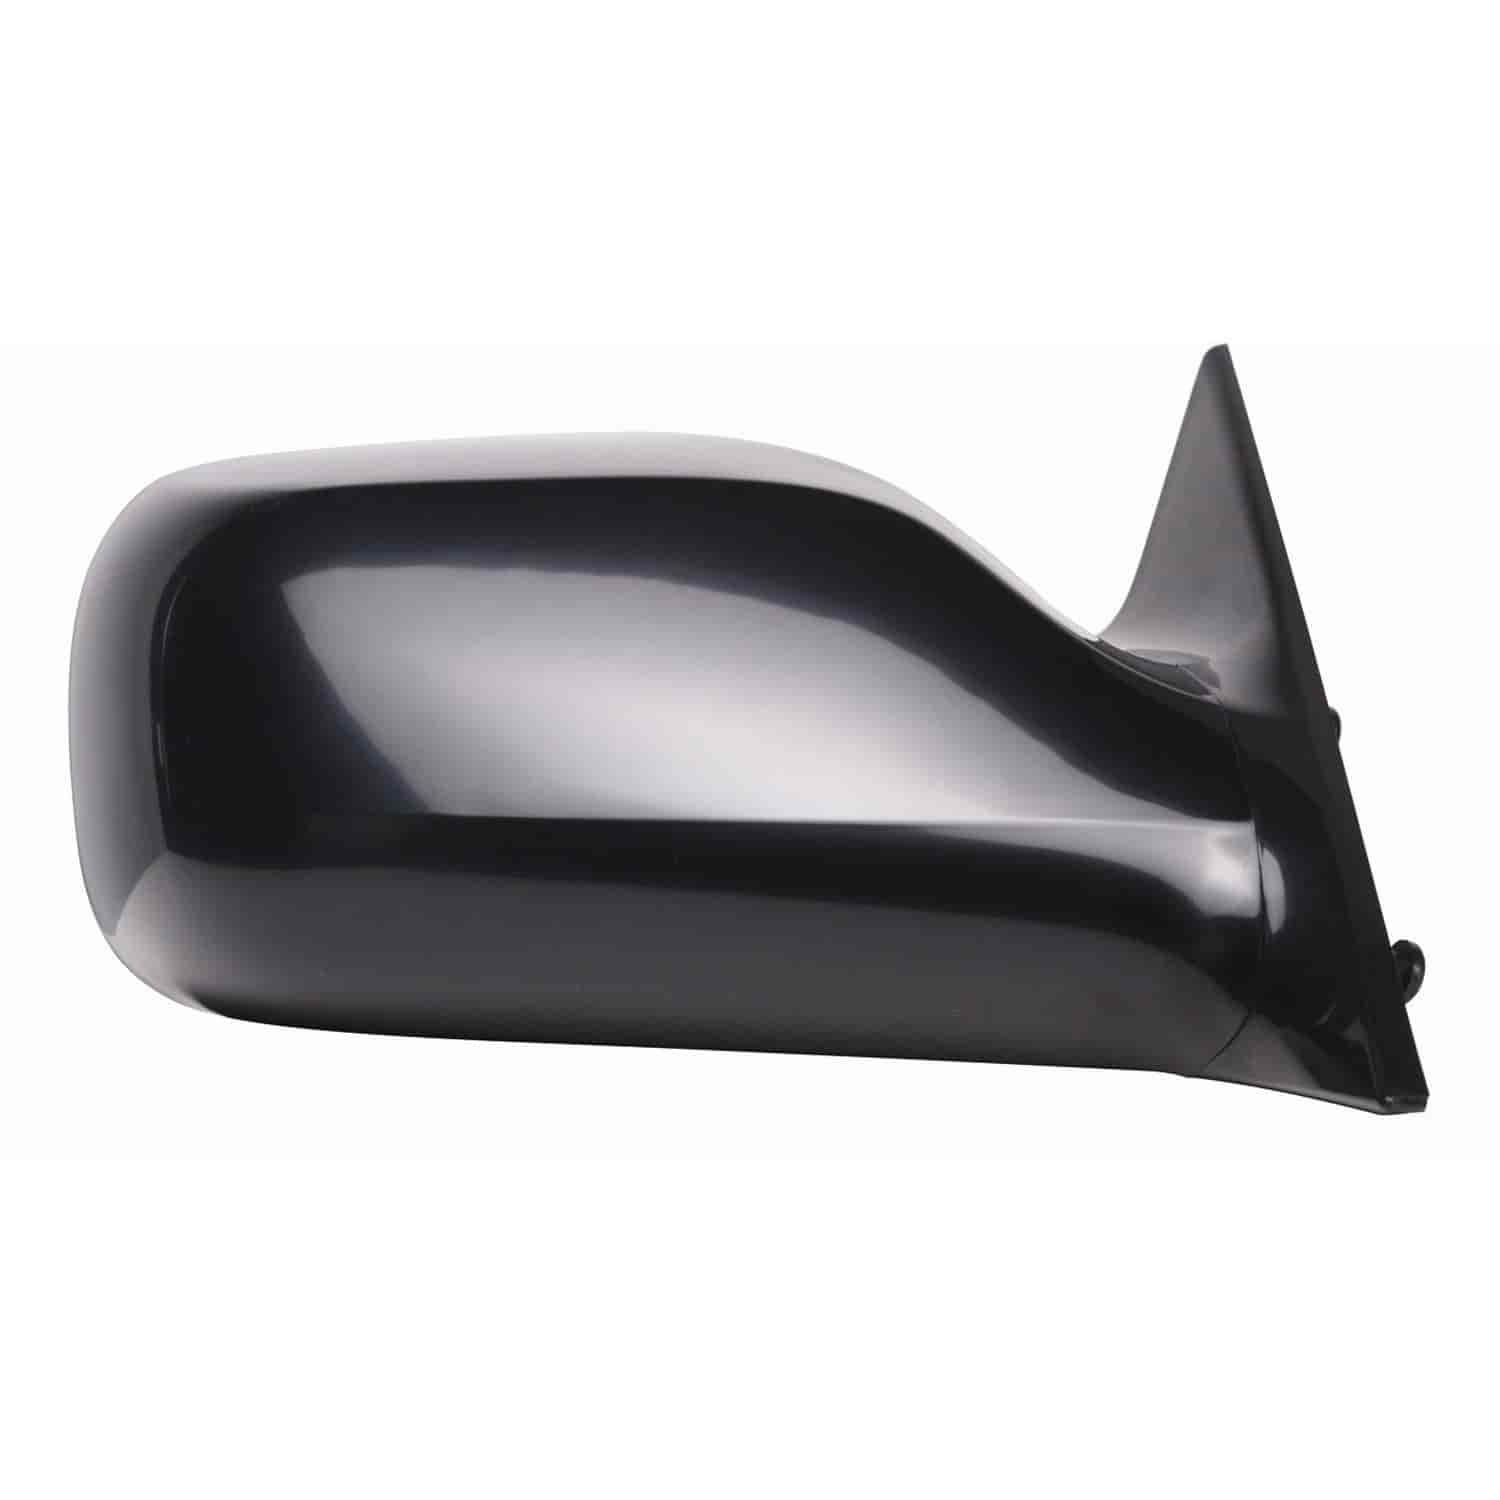 OEM Style Replacement mirror for 05-10 Toyota Avalon touring XL Model passenger side mirror tested t